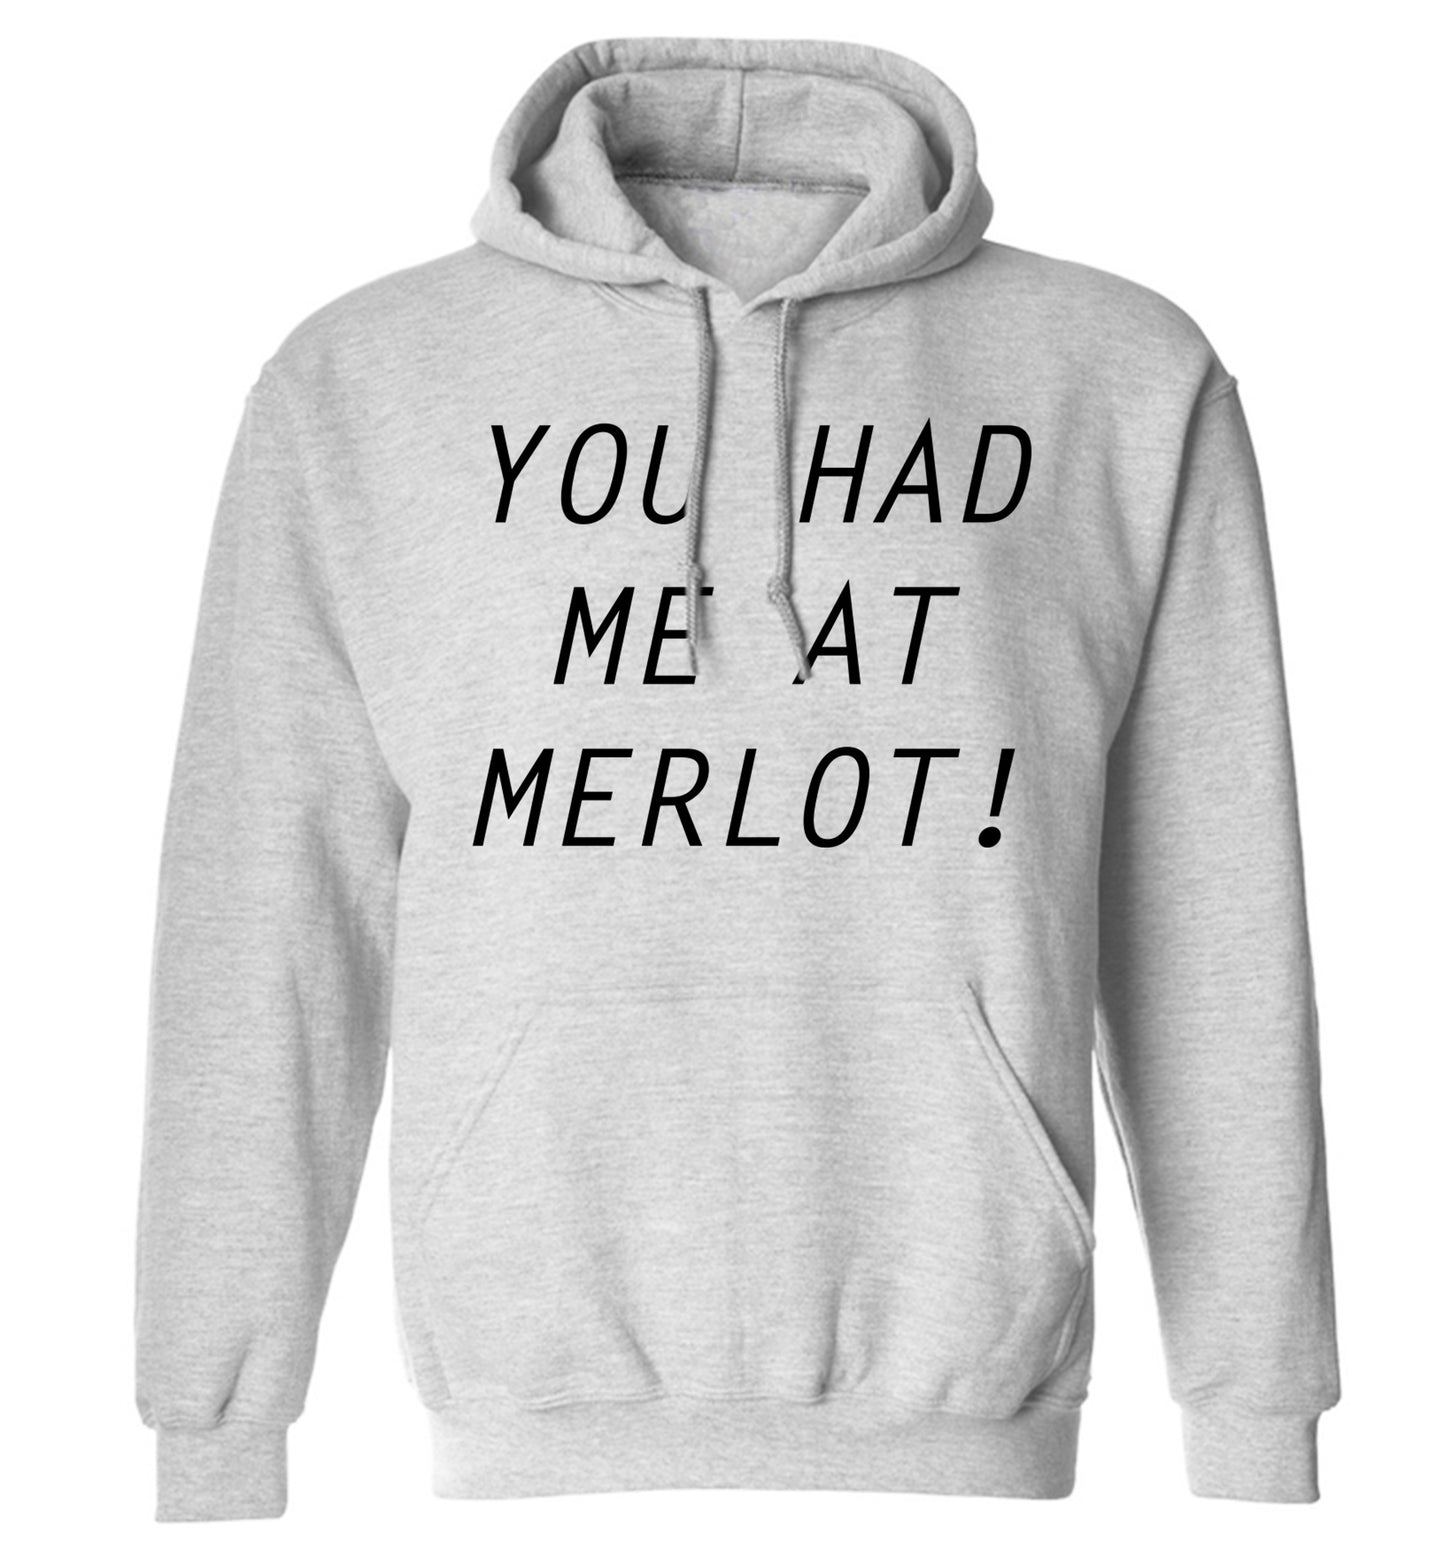 You had me at merlot adults unisex grey hoodie 2XL